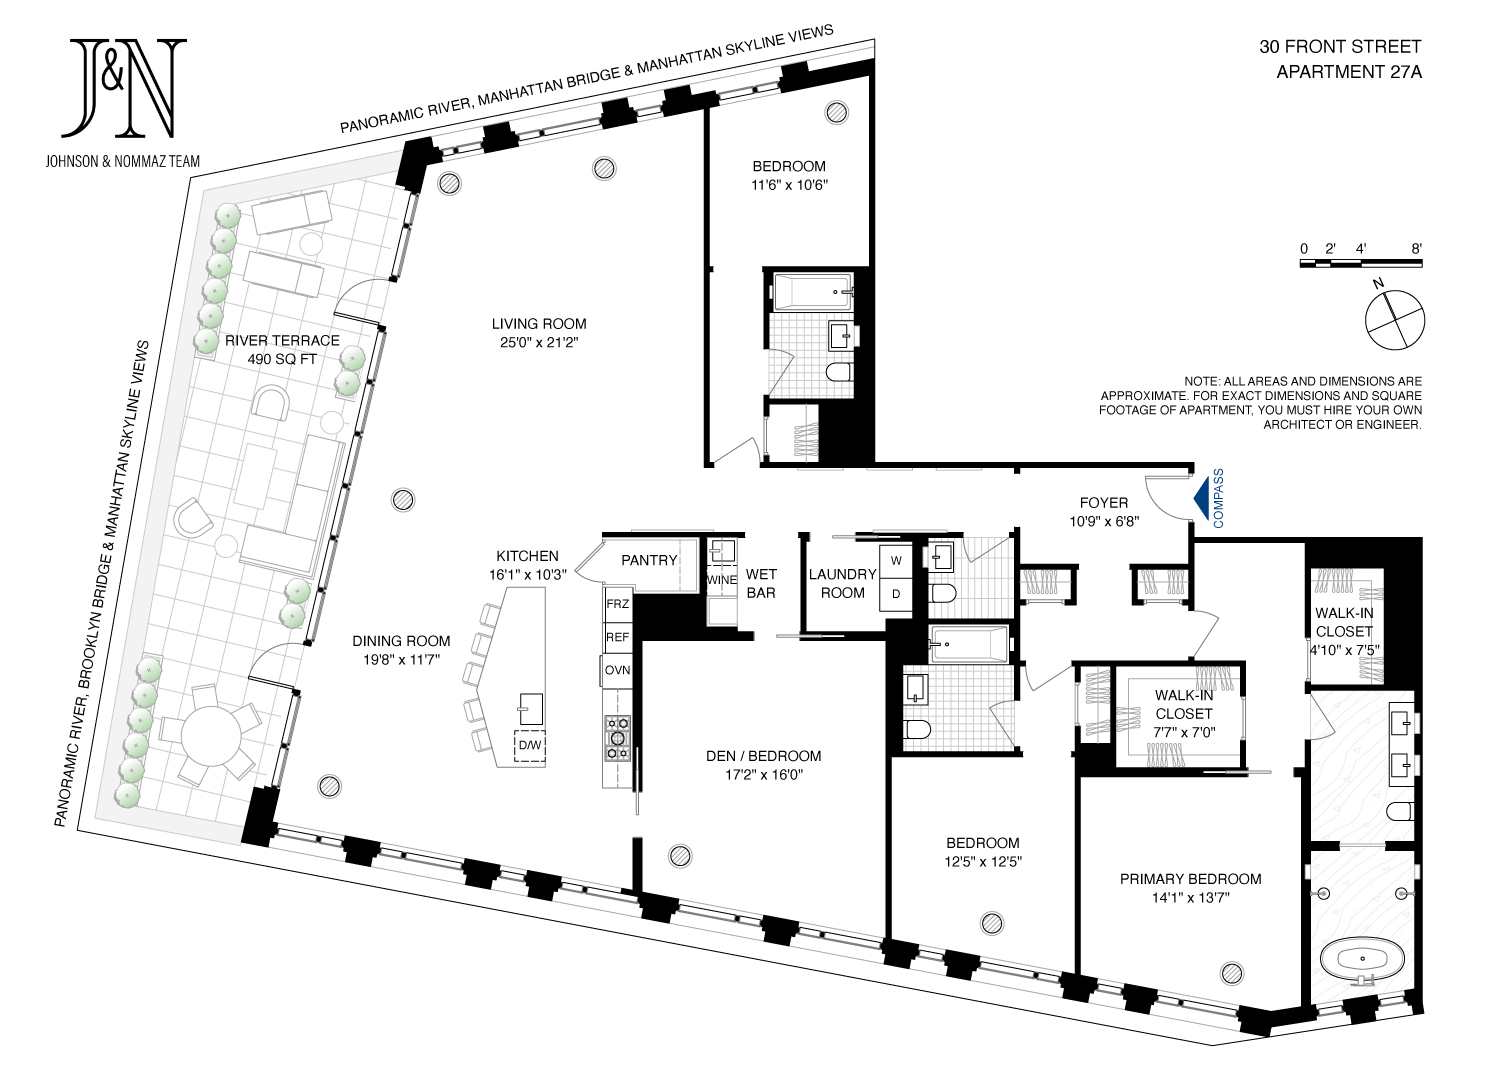 Floorplan for 30 Front Street, 27A